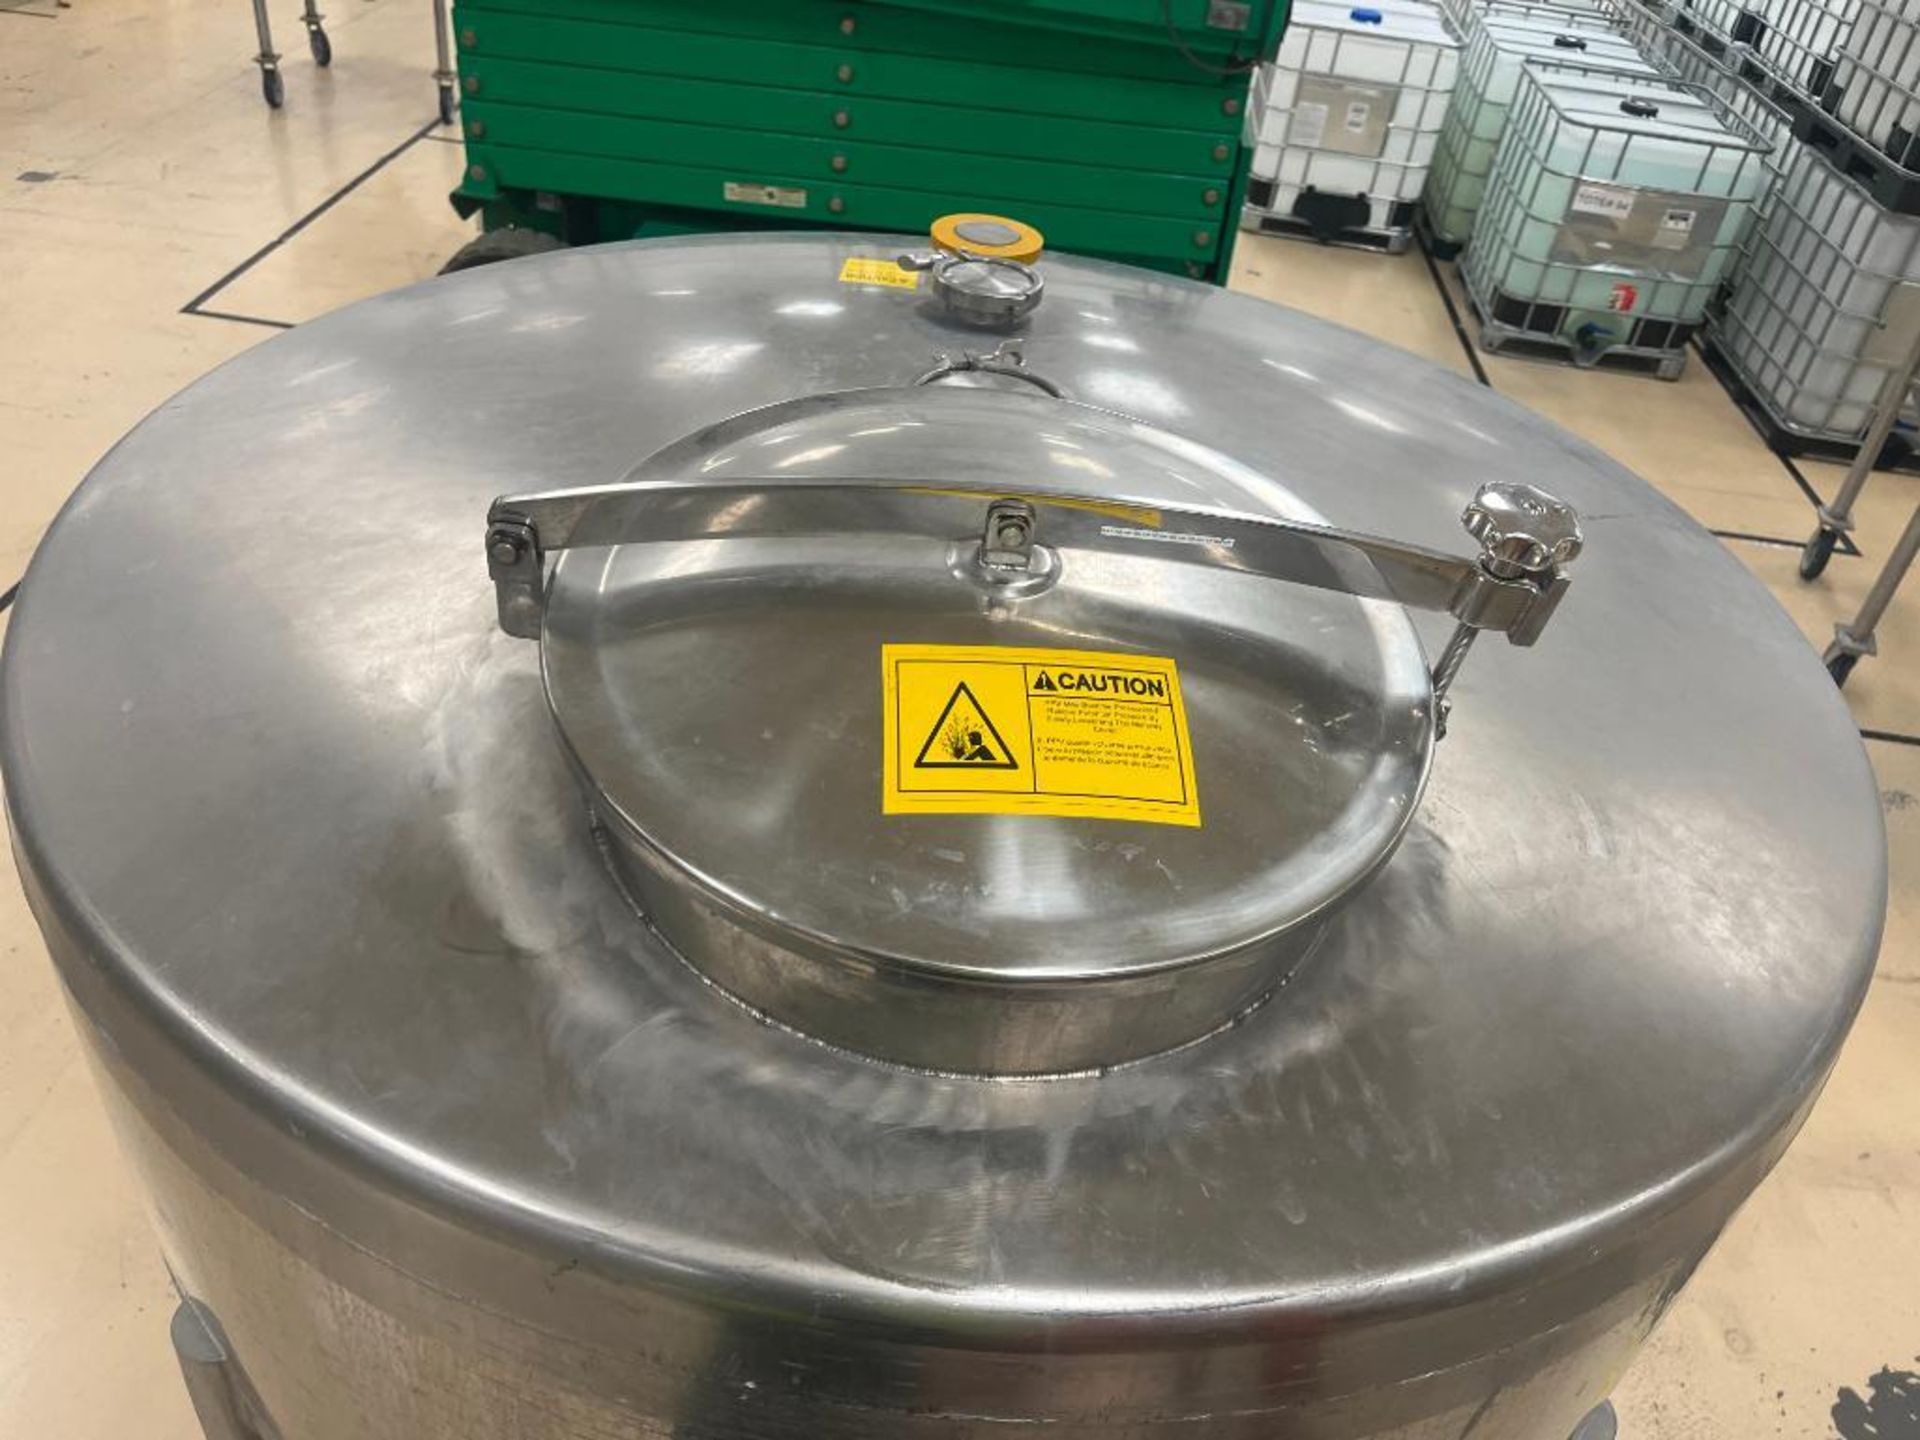 Zanchetta Portable Stainless Steel Tank, Aproximate 1000 Liter Dish Top Cone Bottom. Top Manway, Cen - Image 7 of 9